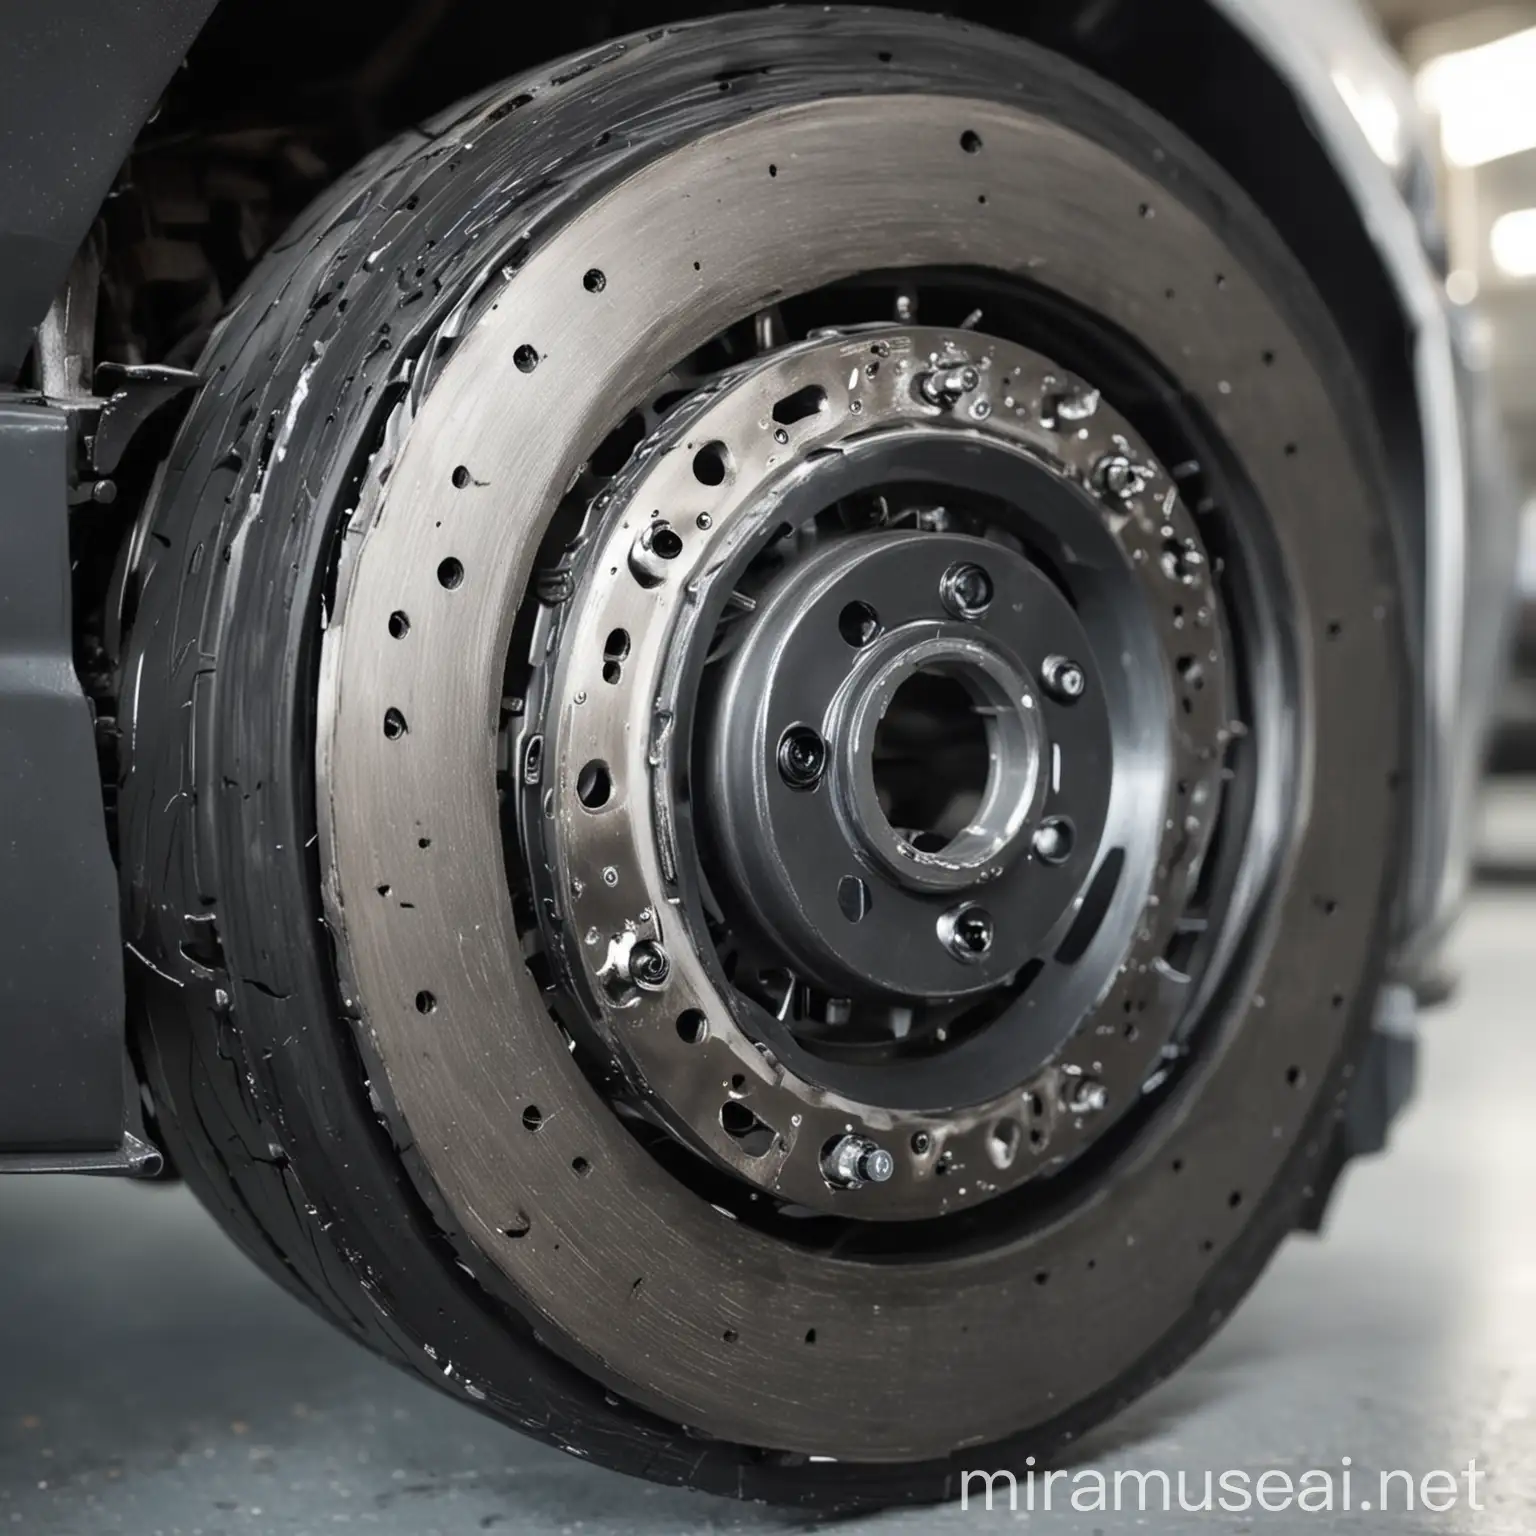 HighDefinition Car Image Featuring Visible Brake Disc